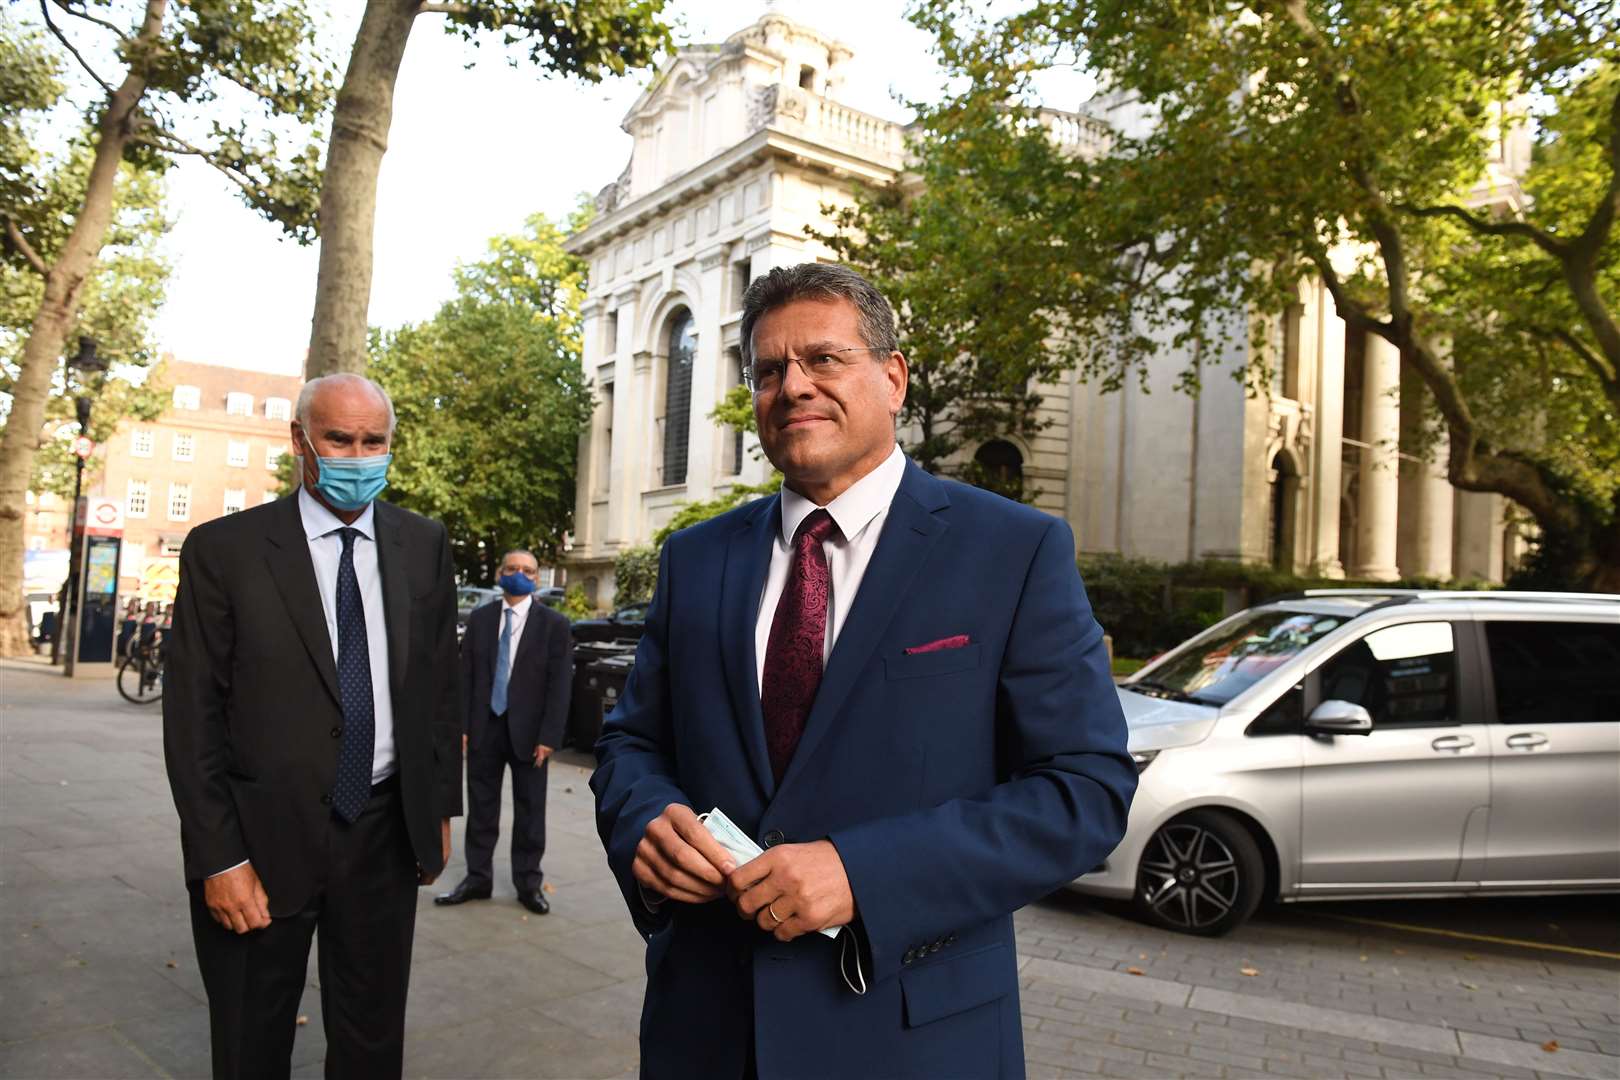 EU Commission vice-president Maros Sefcovic (right) (Stefan Rousseau/PA)